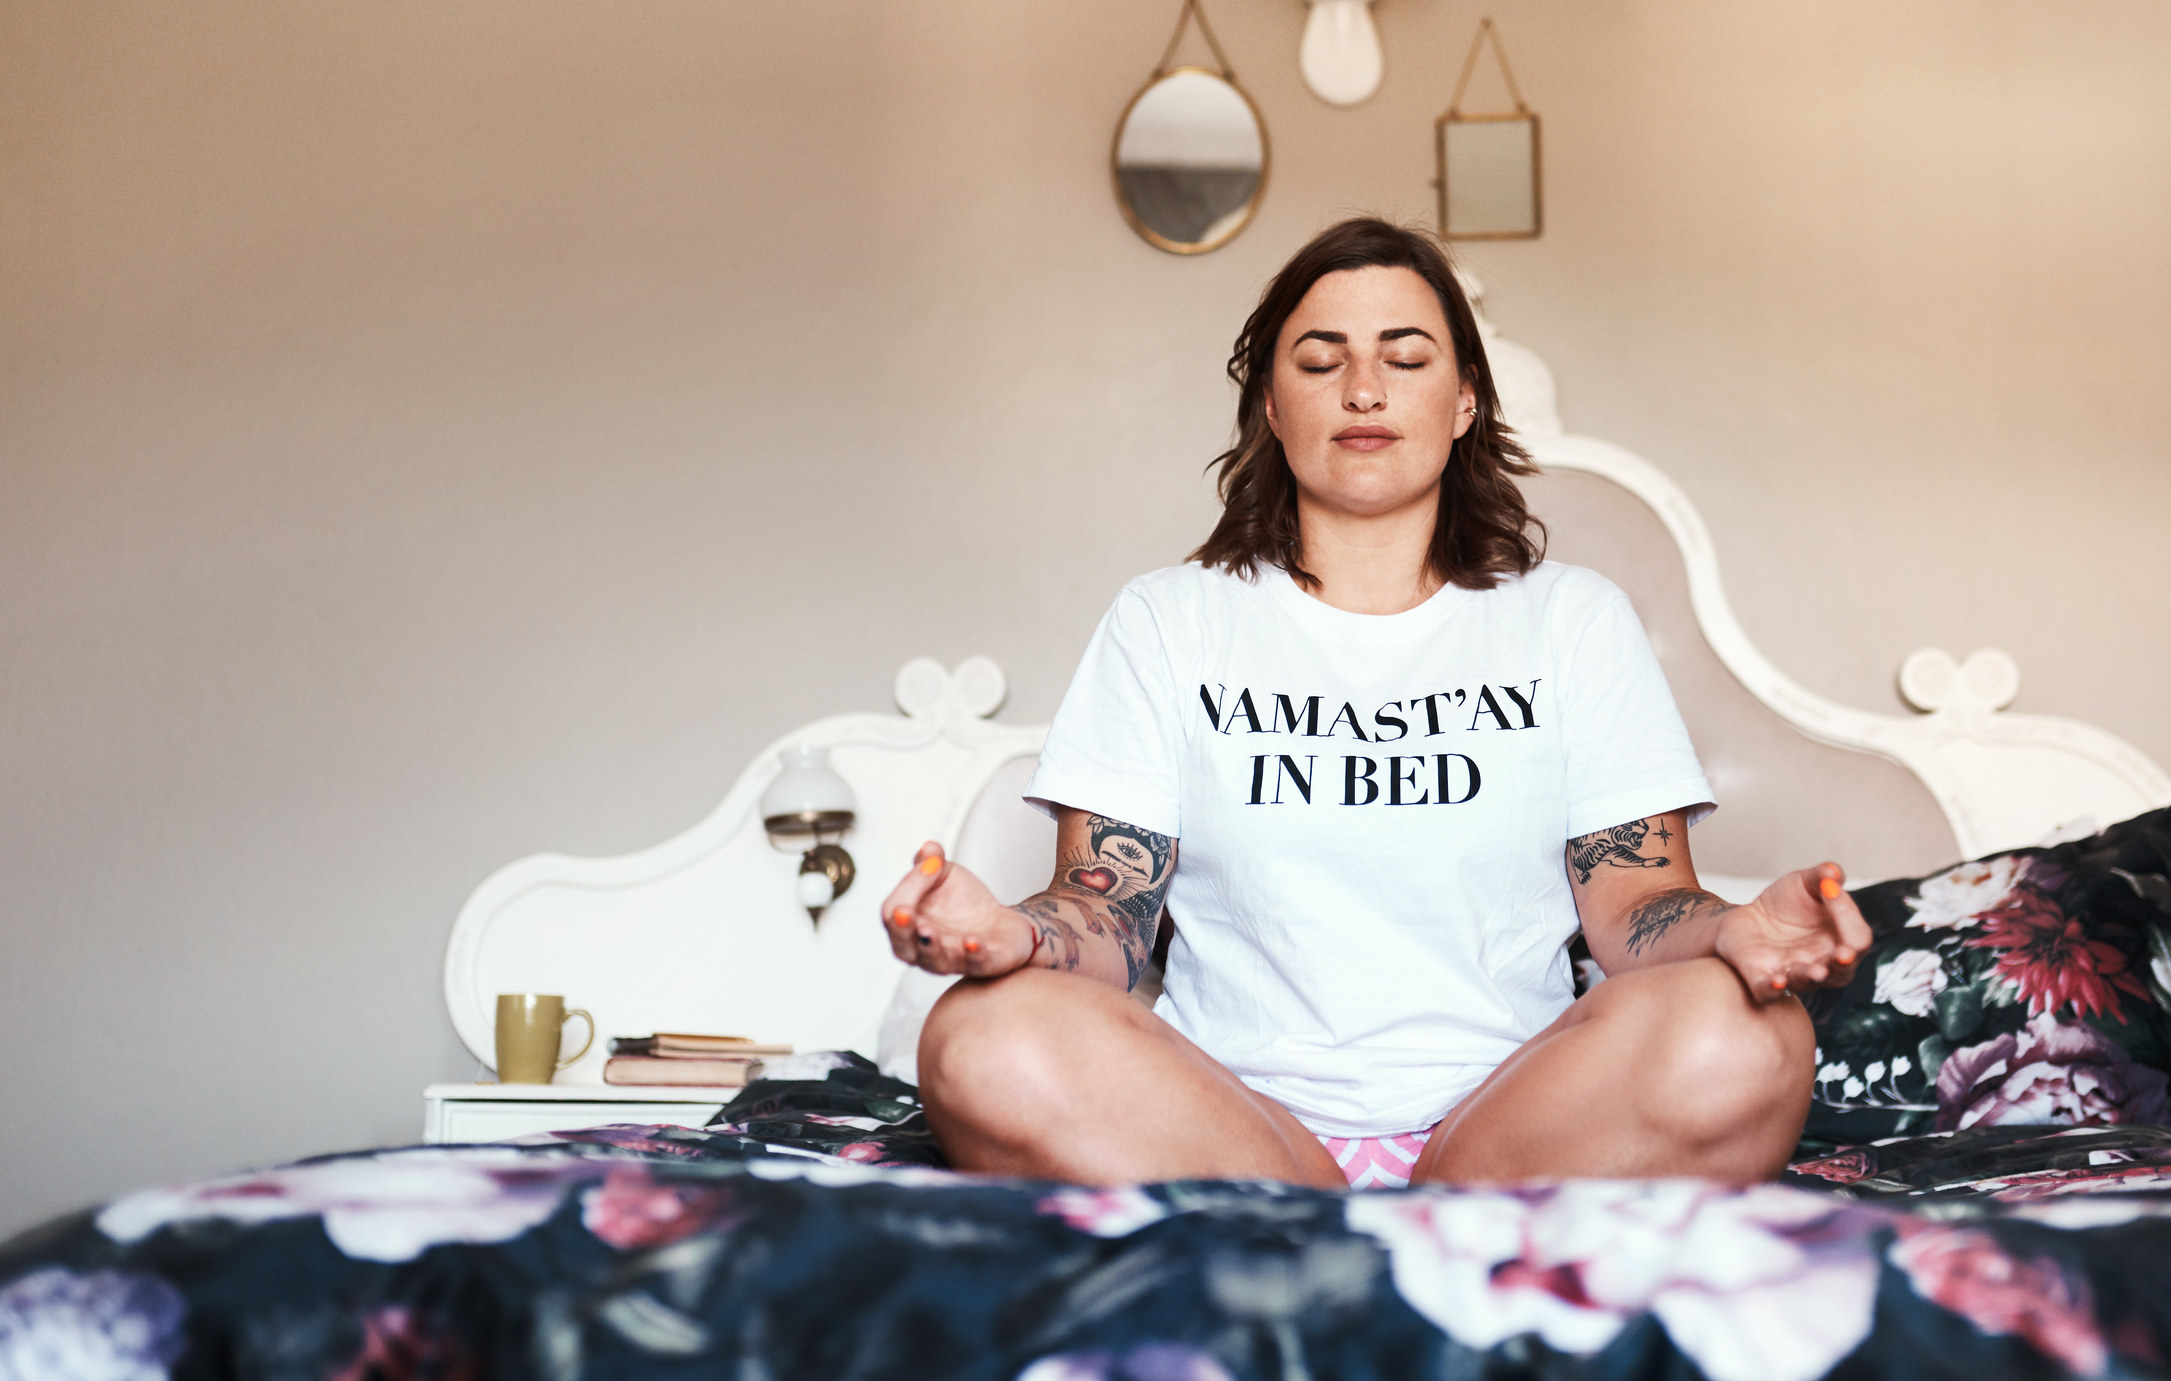 A girl meditates in bed wearing a shirt that says &quot;namastay in bed&quot;